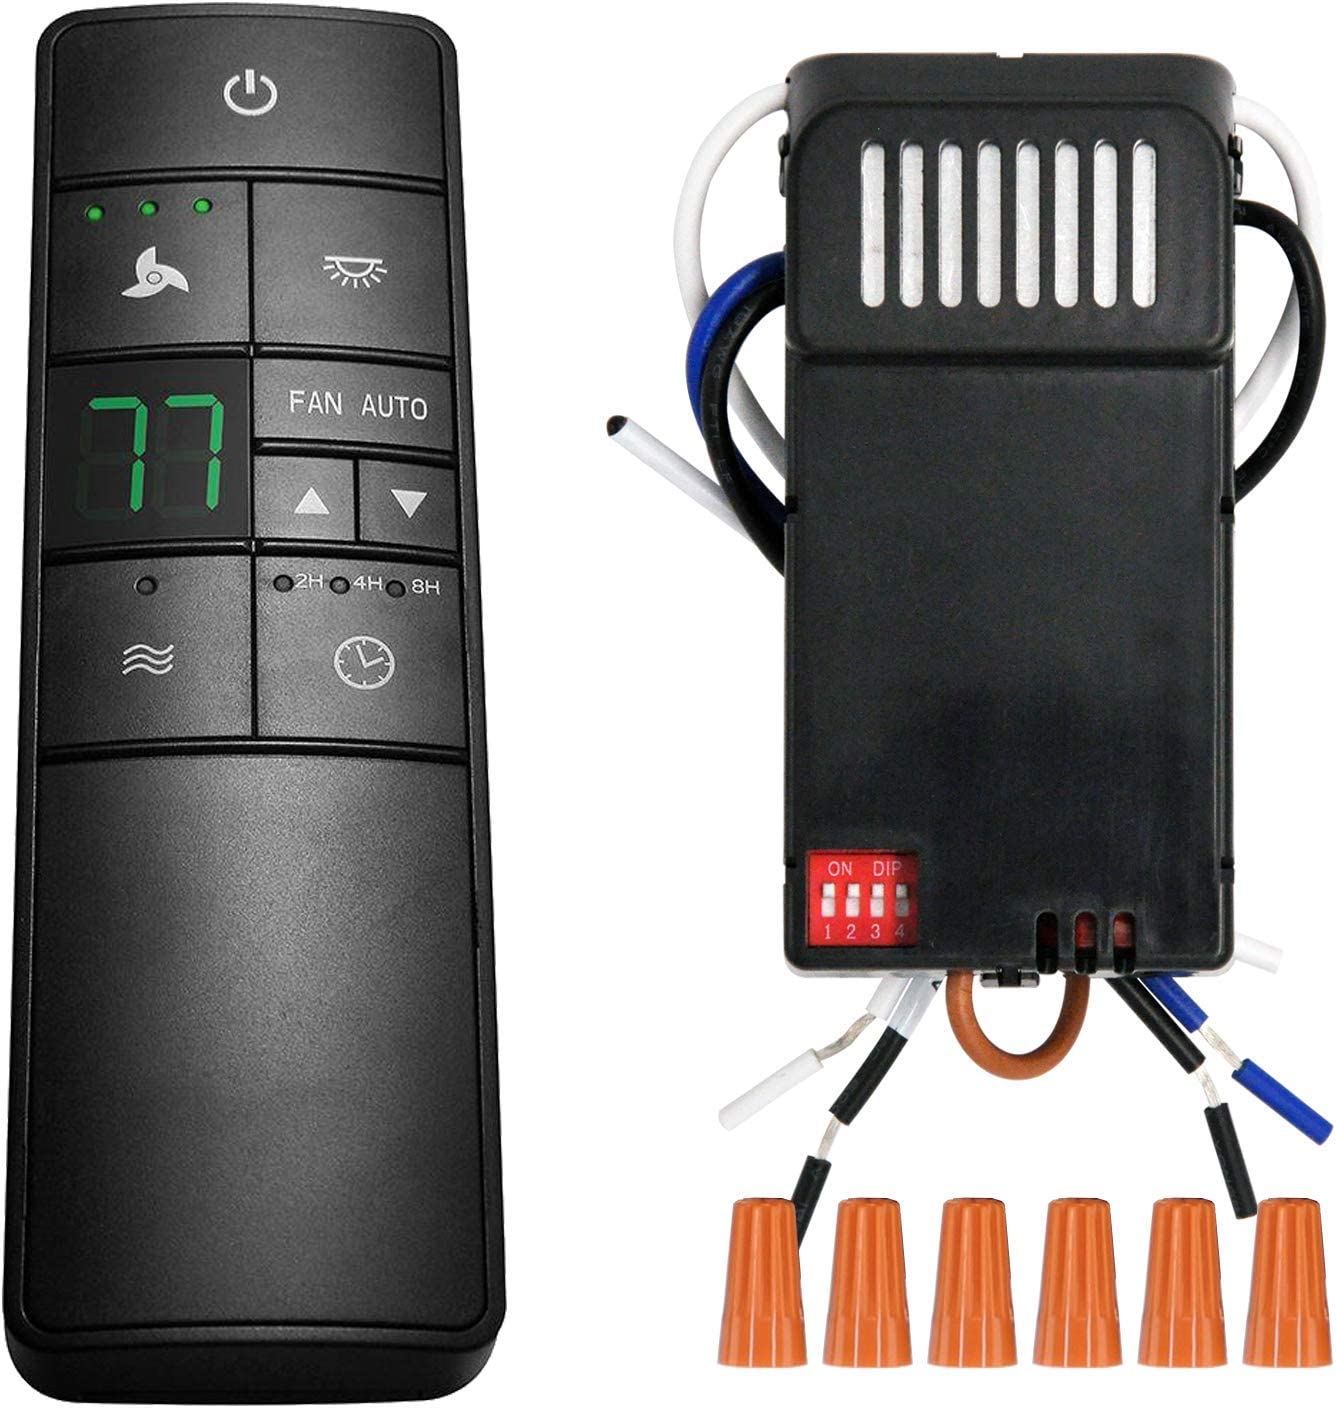 Universal Thermostatic Ceiling Fan Remote Control Kit